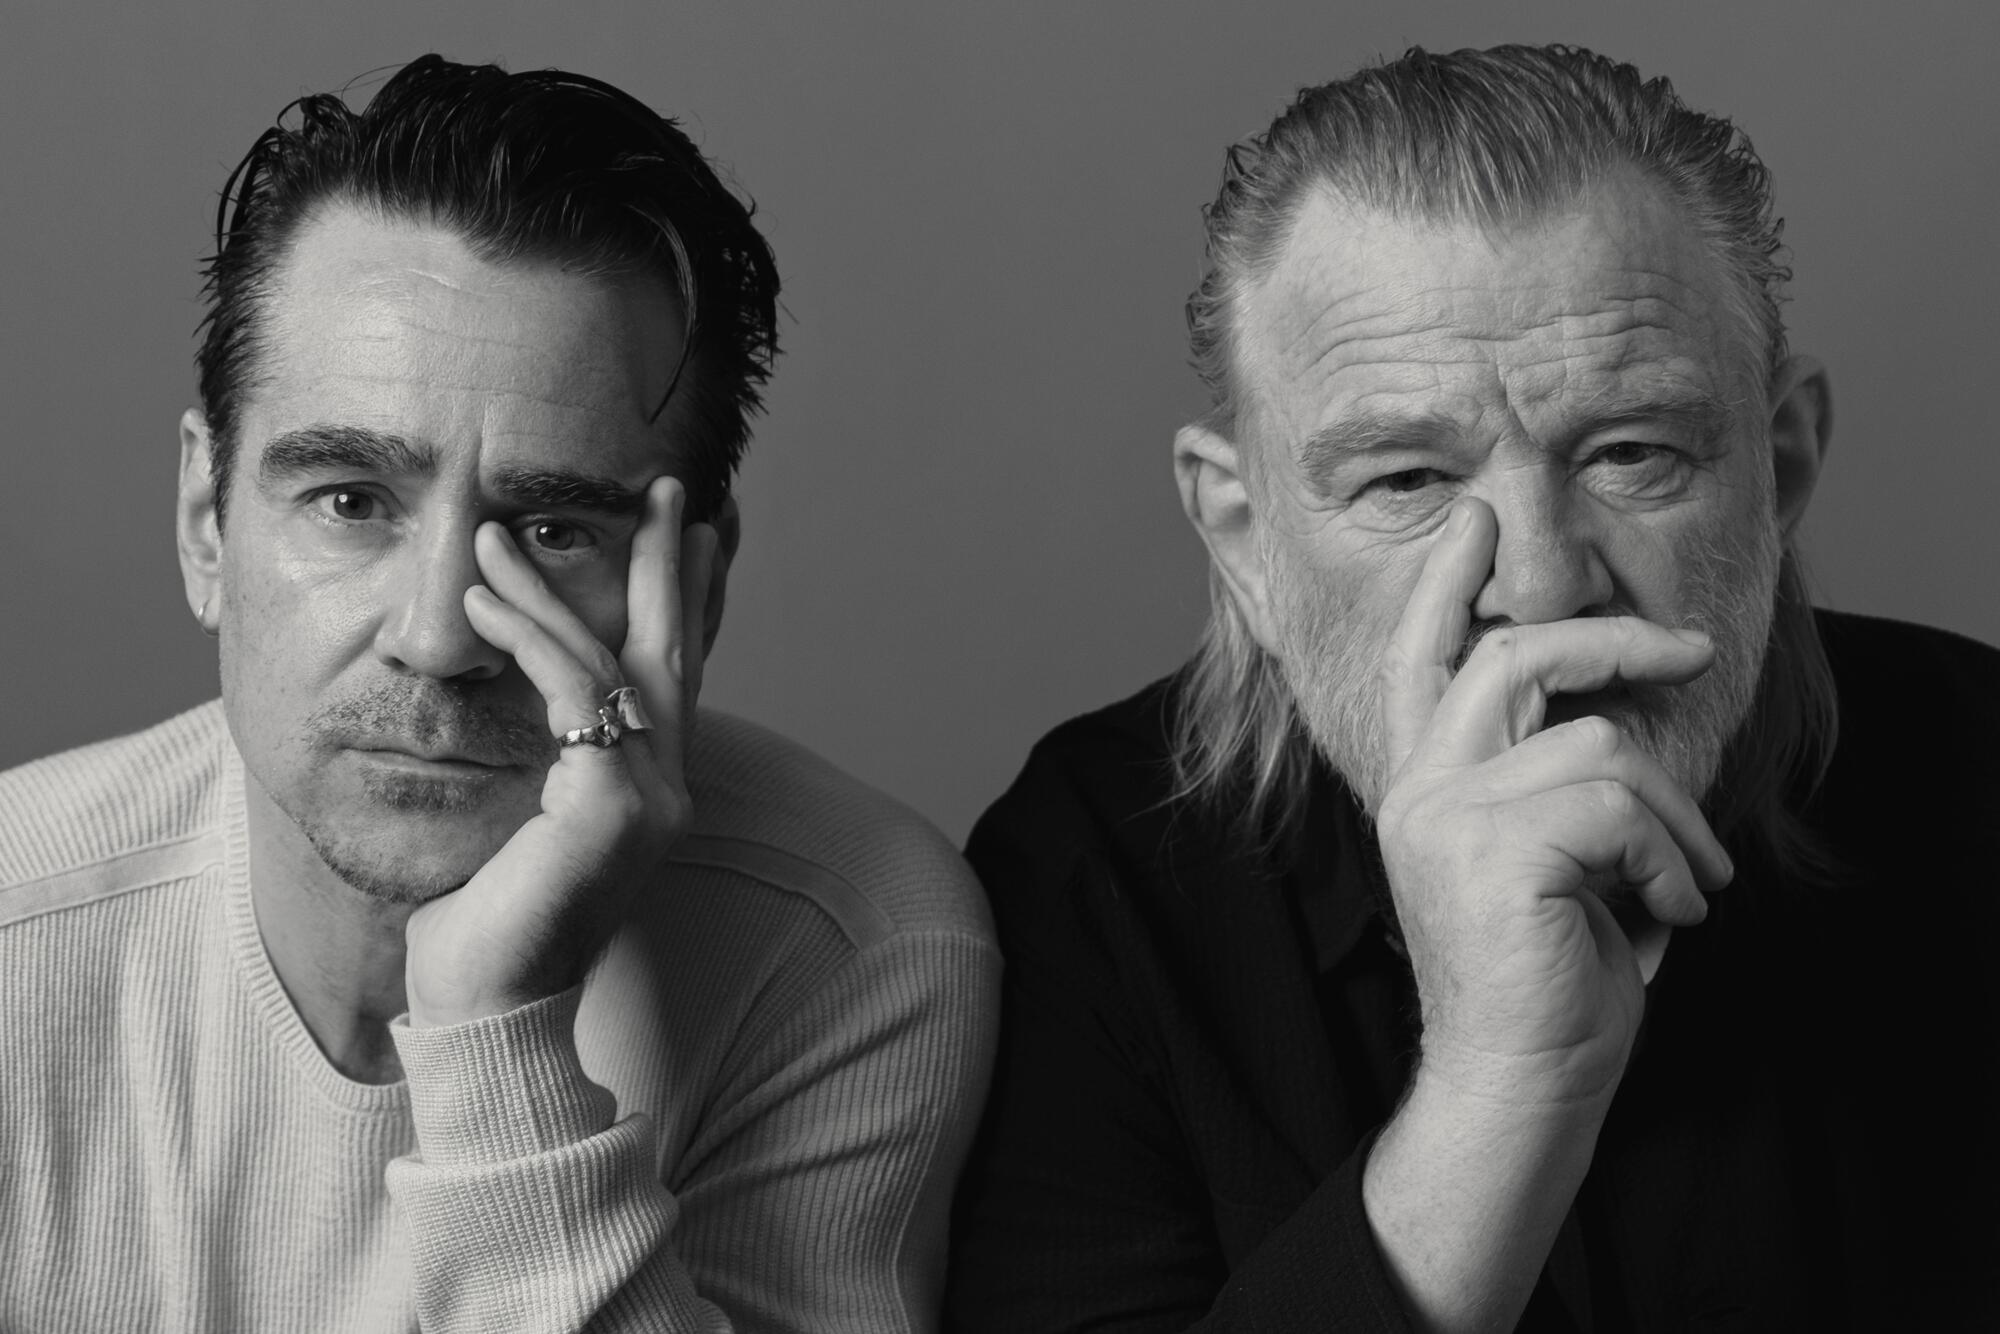 NEW YORK, NY - OCTOBER 14, 2022: Colin Farrell and Brendan Gleeson from “The Banshees of Inisherin.”